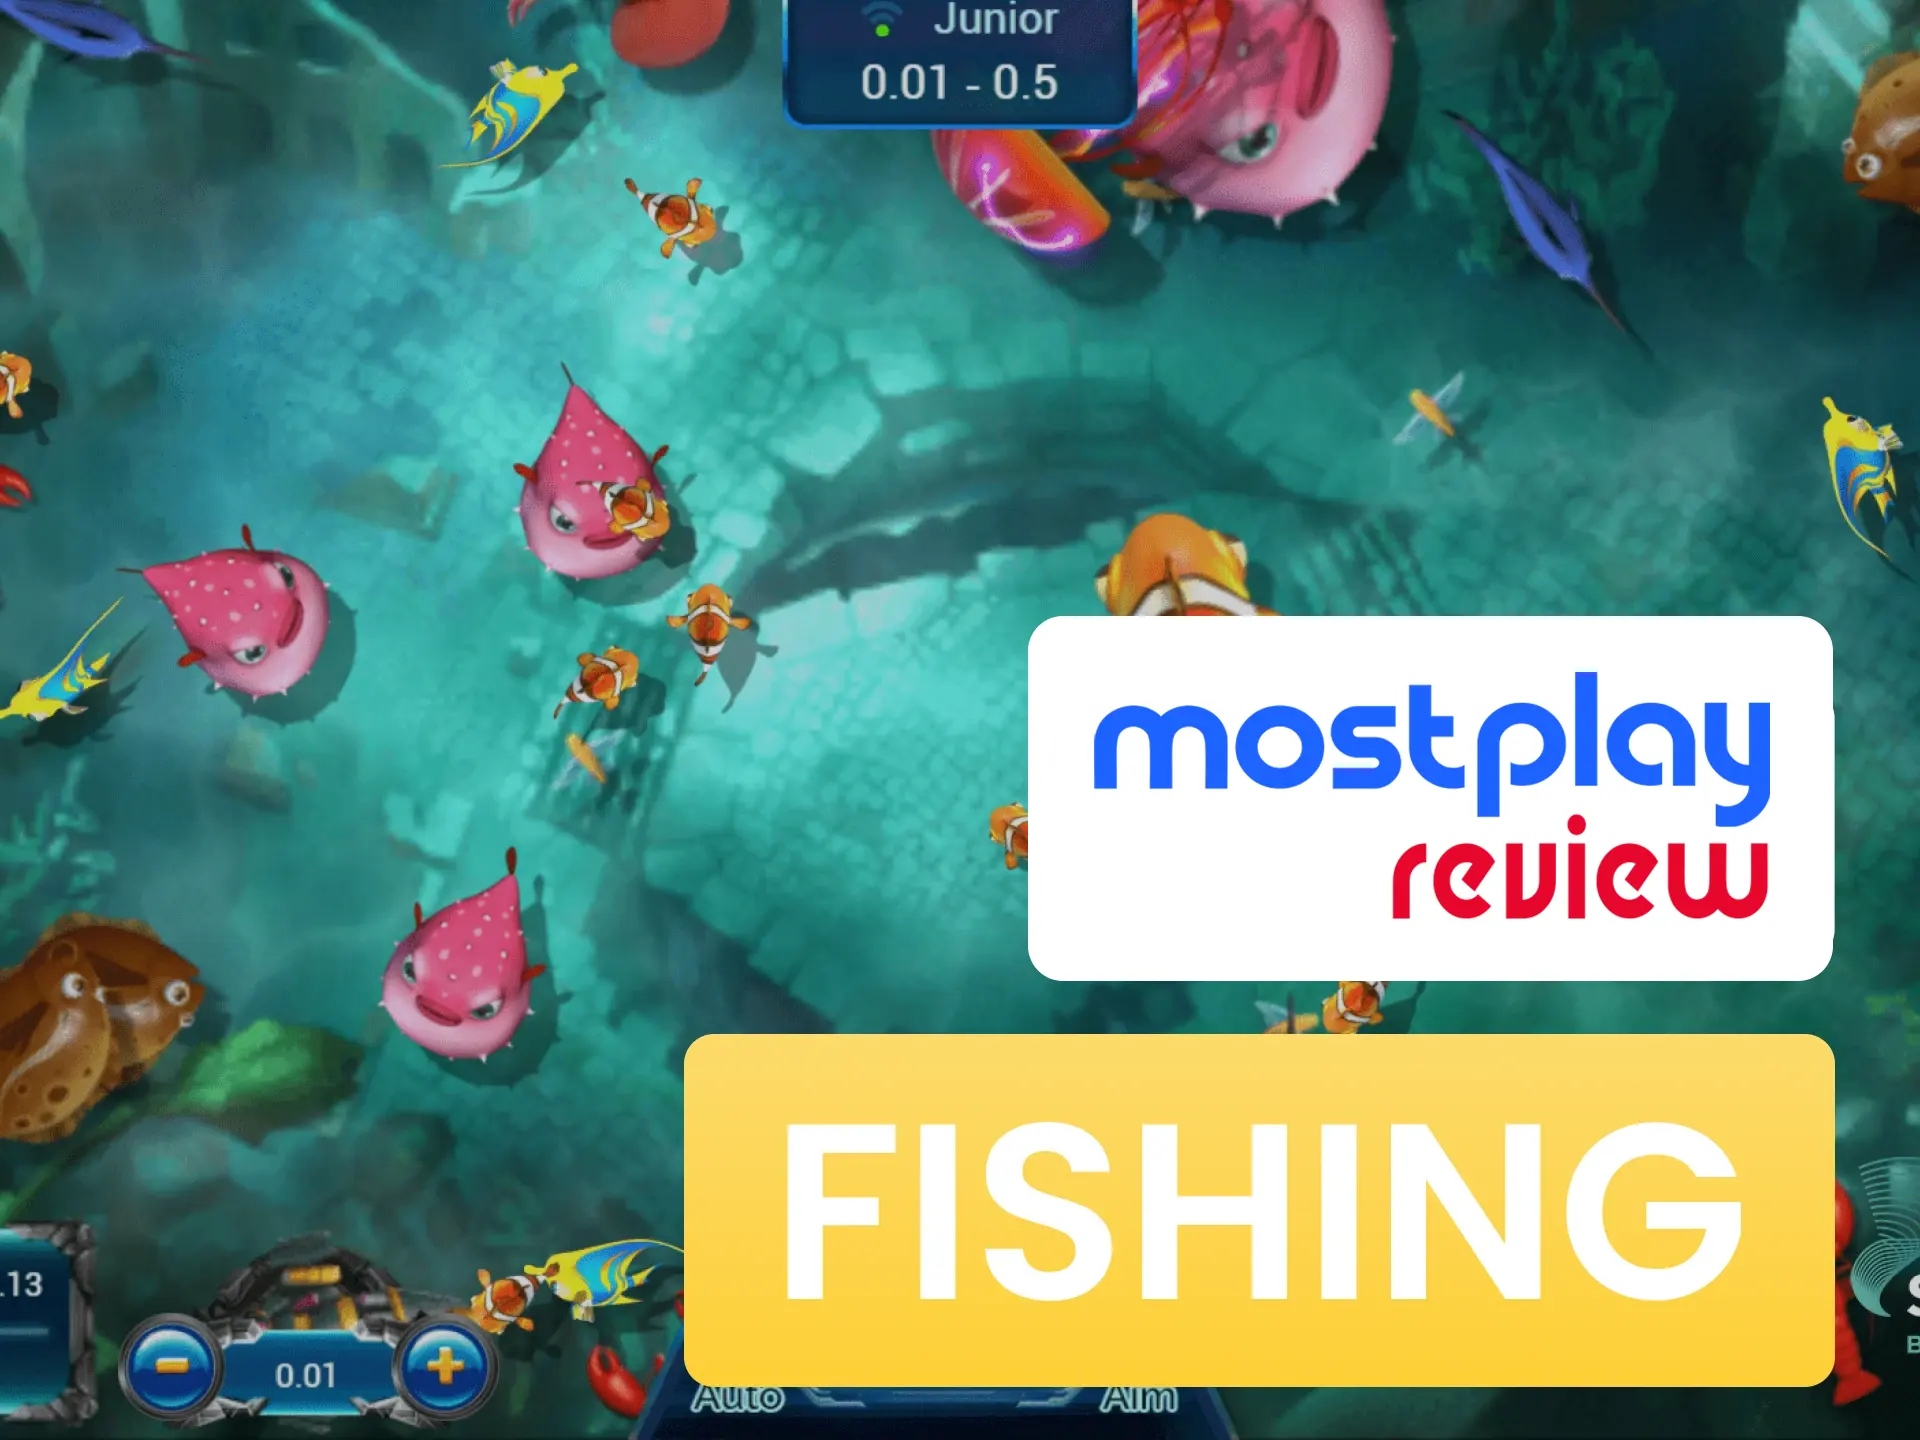 Try fishing games at the Mostplay casino.